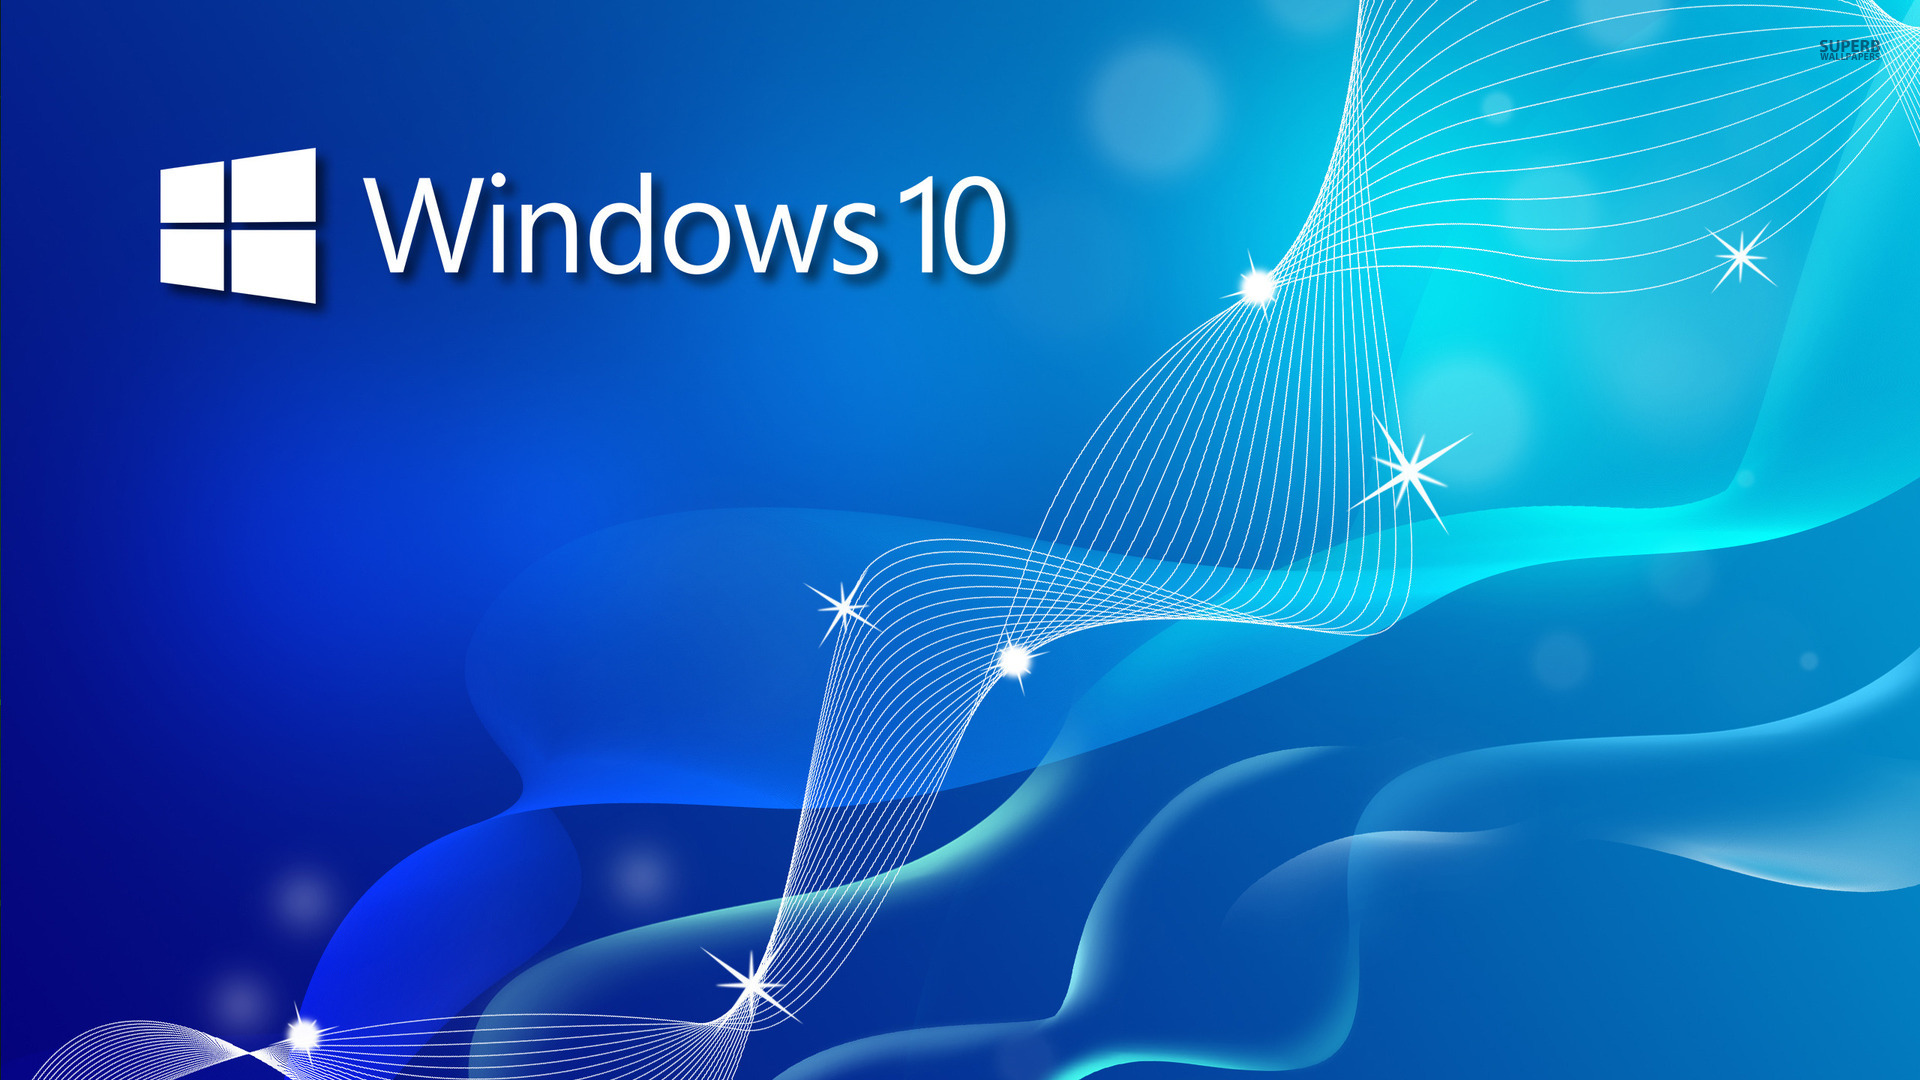 where to download wallpapers for windows 10